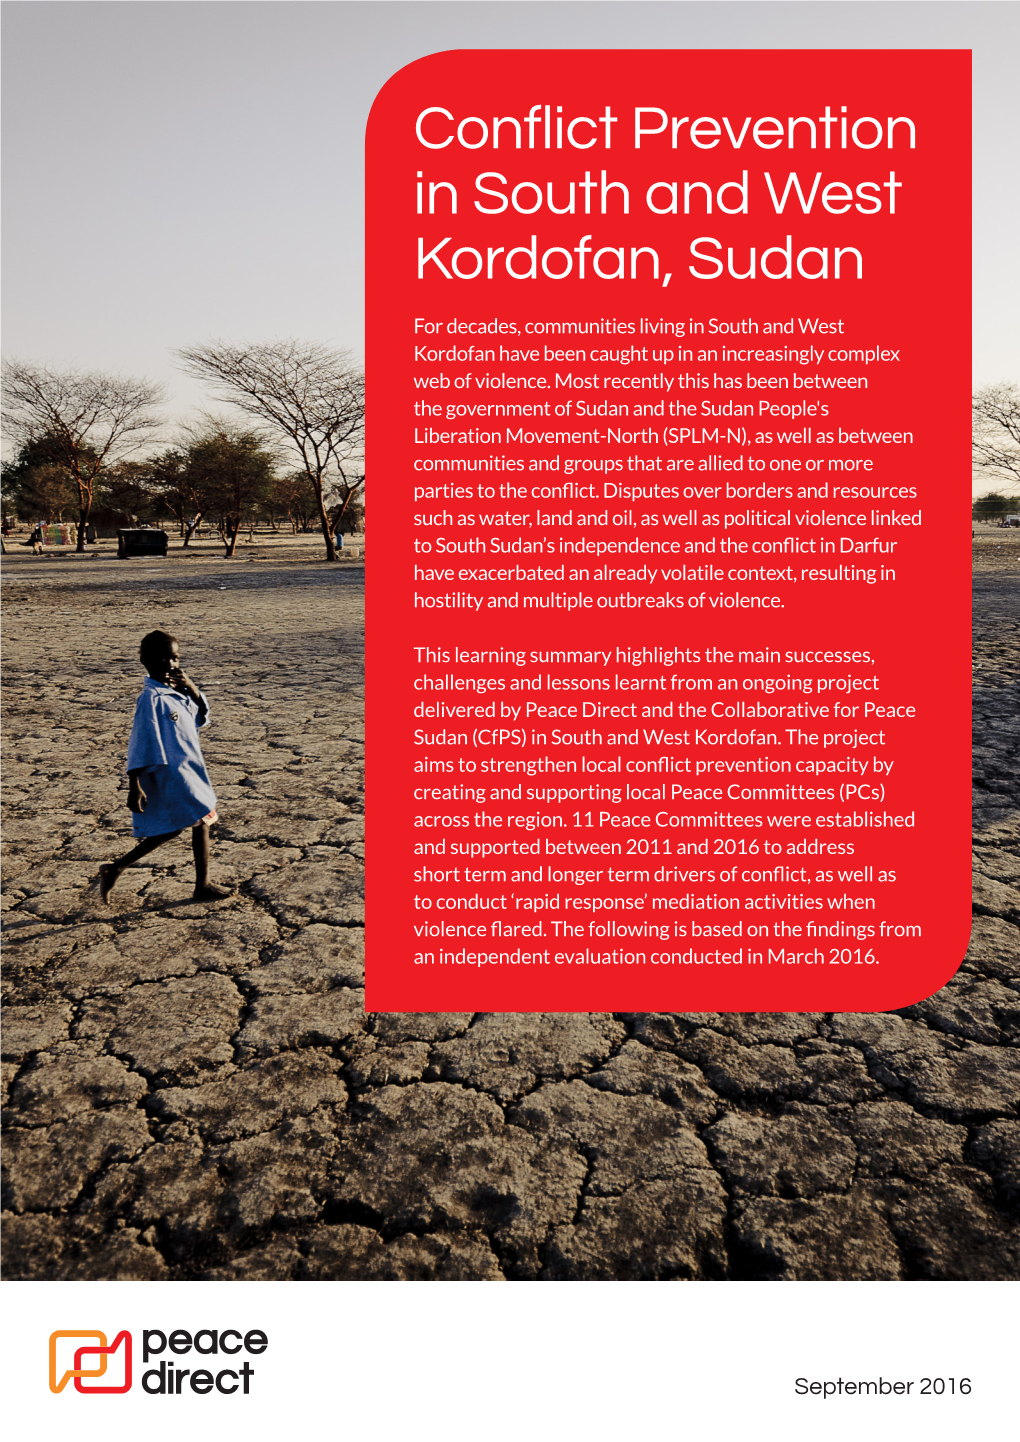 Conflict Prevention in South and West Kordofan, Sudan